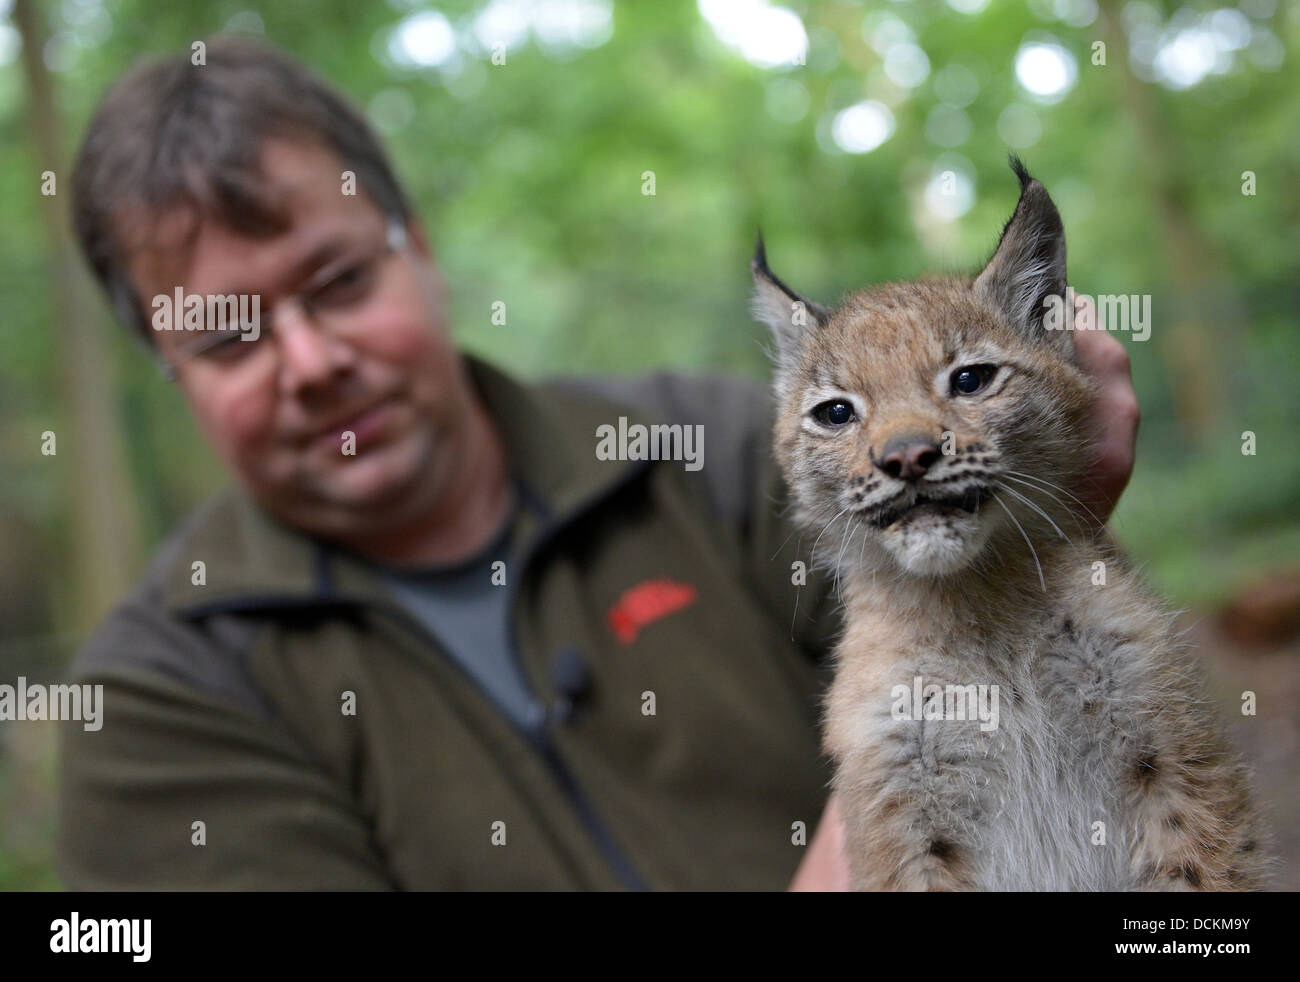 Edertal-Hemfurth, Germany. 20th Aug, 2013. Animal keeper Thomas Wagener holds a three month old lynx sat the Wildlife Park Edersee in Edertal-Hemfurth, Germany, 20 August 2013. Two young lynx are currently the main attraction of the wildlife park. Photo: Uwe Zucchi/dpa/Alamy Live News Stock Photo